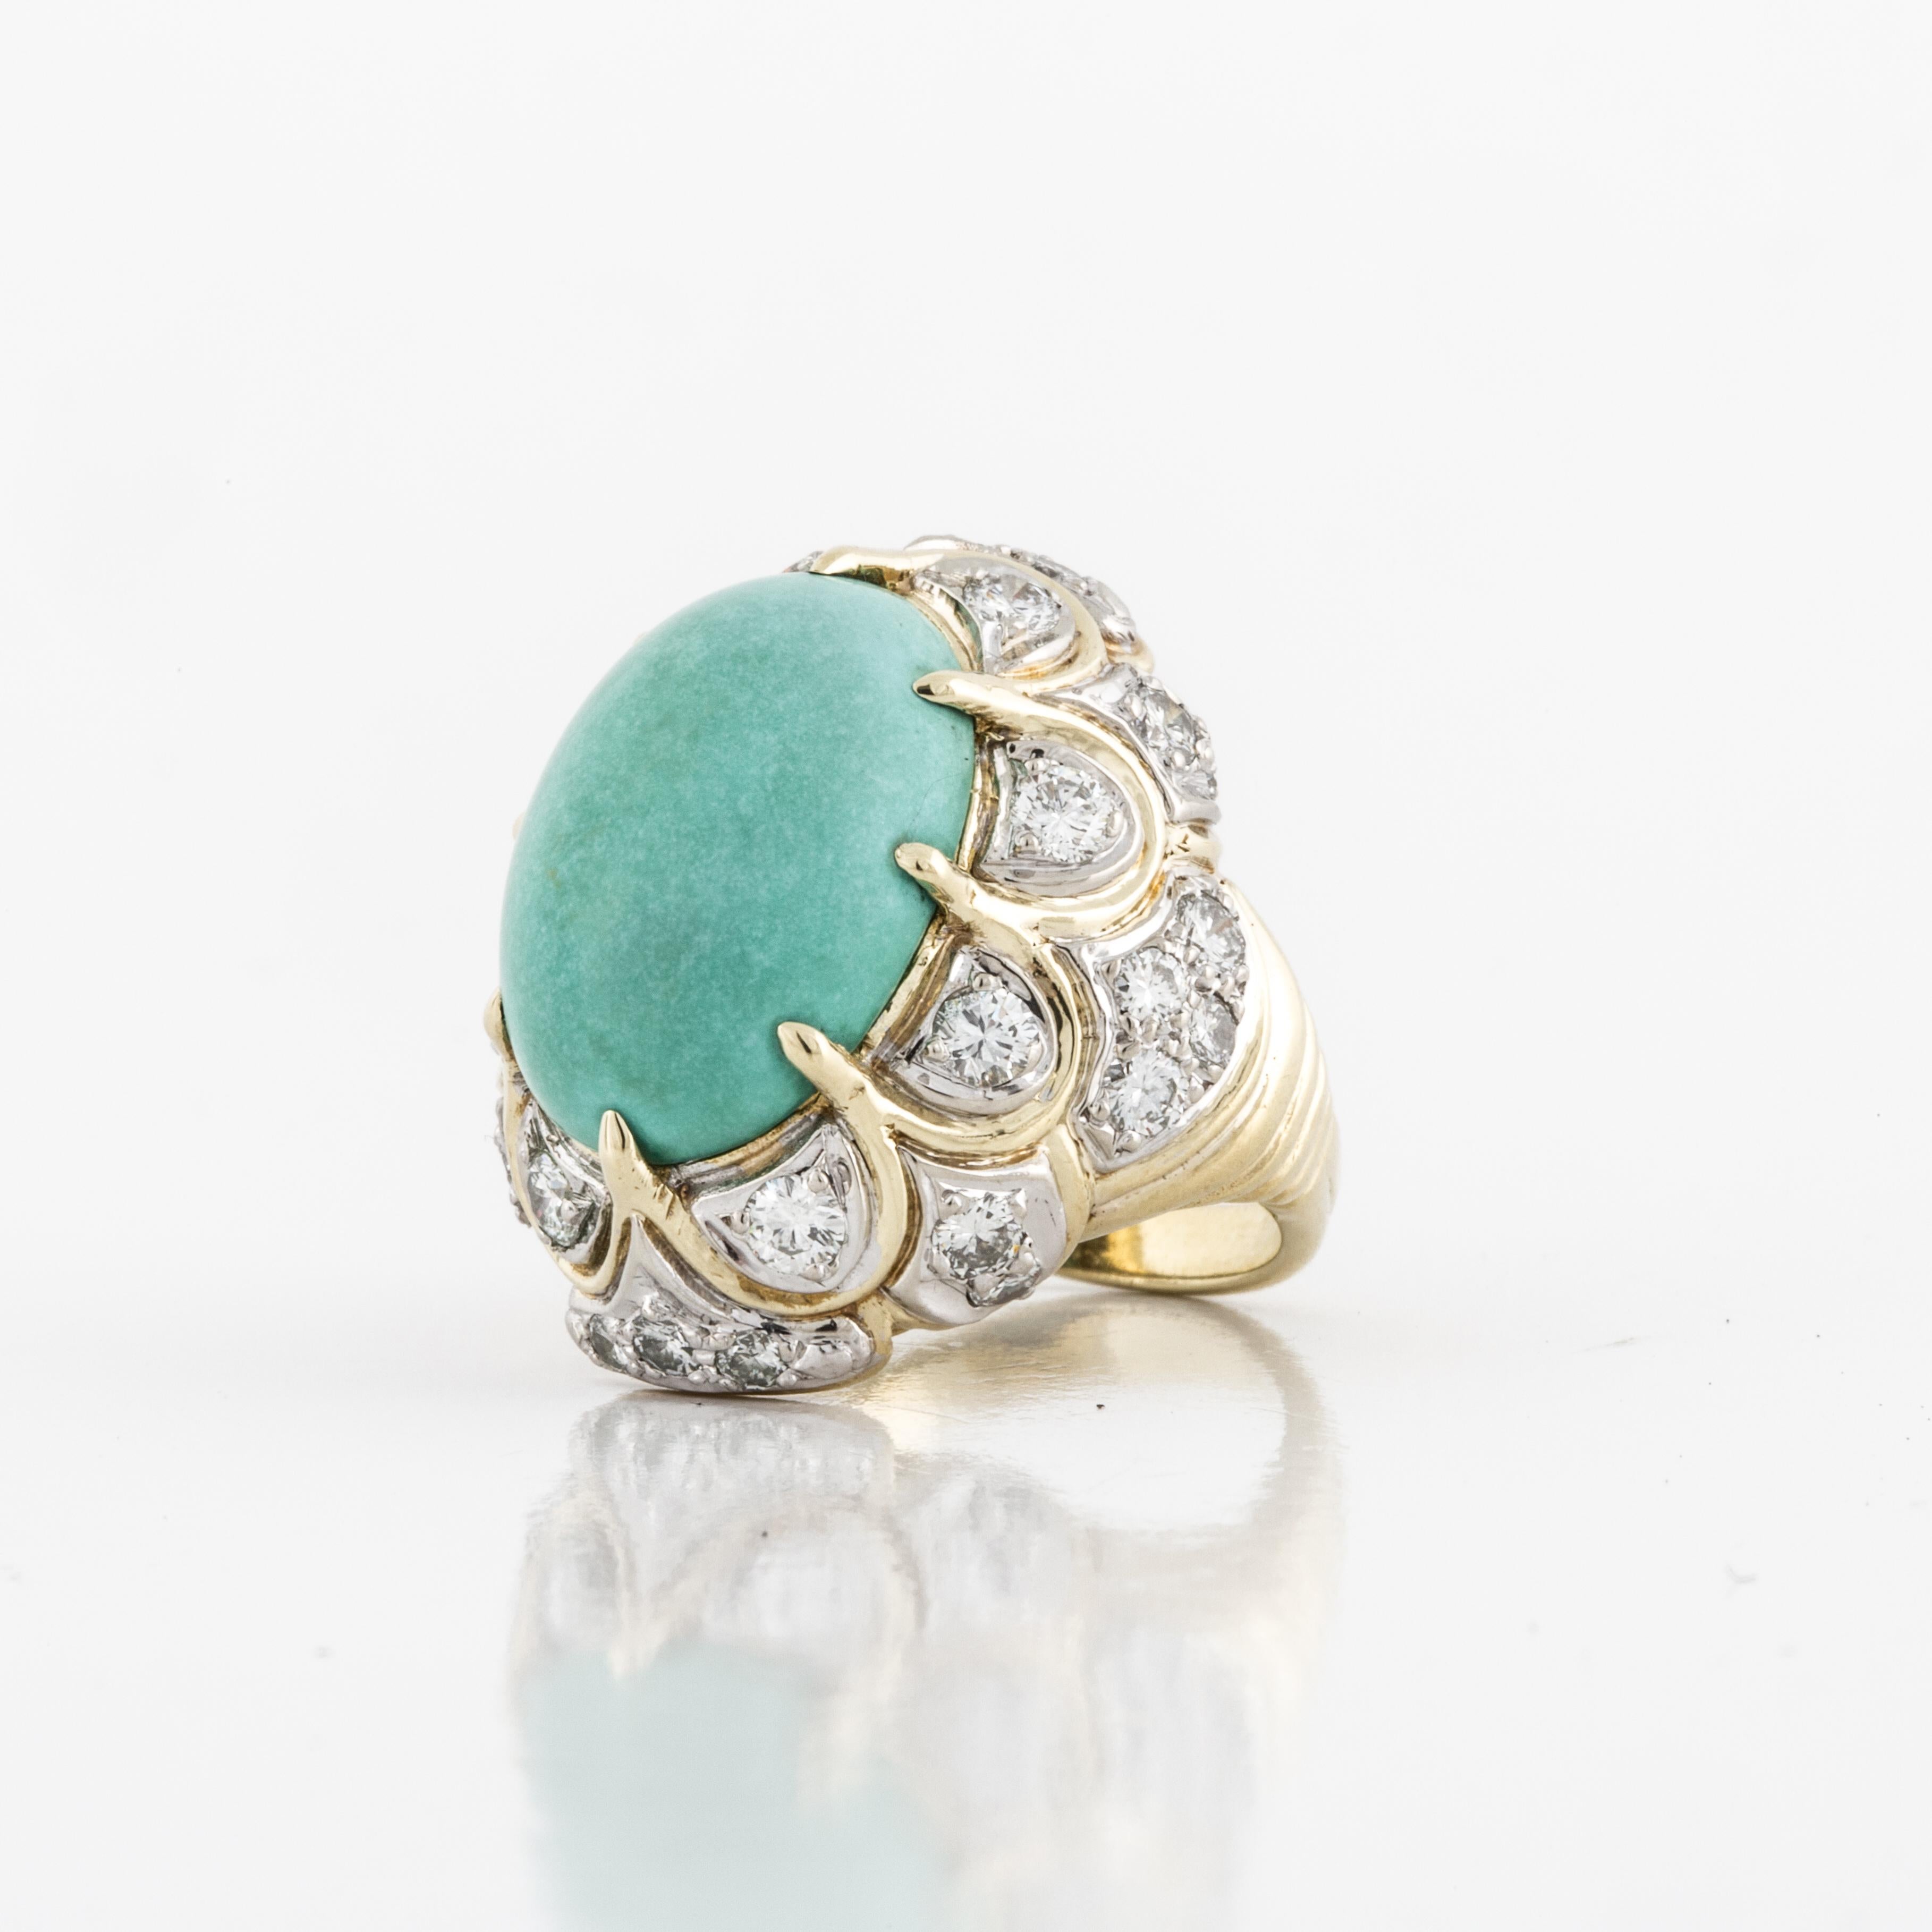 18K yellow gold ring featuring a turquoise stone accented with diamonds that are set in white gold.  There are 30 round brilliant-cut diamonds with a total carat weight of 2.10; G-H color and VS clarity.  Ring is currently a size 6 1/4. 